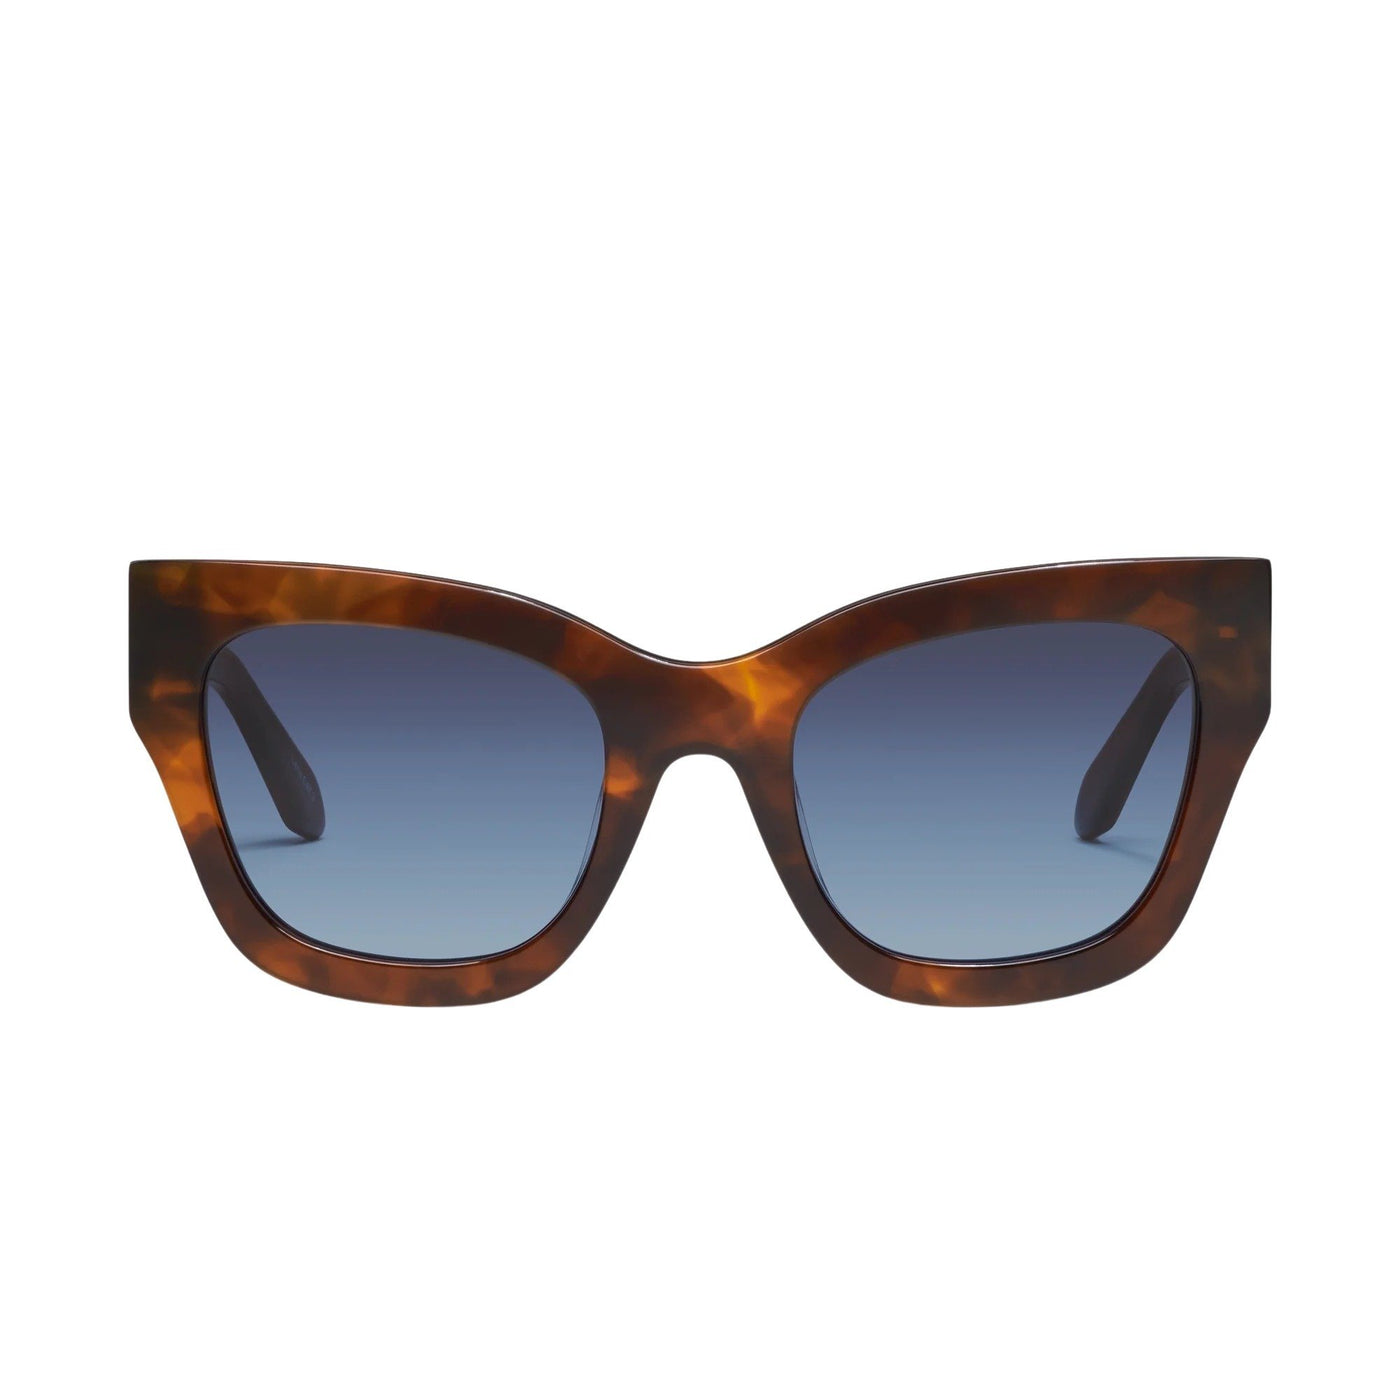 Quay Women's By The Way Oversized Square Sunglasses (Brown Tortoise Frame/Navy to Blue Gradient Lens) - front